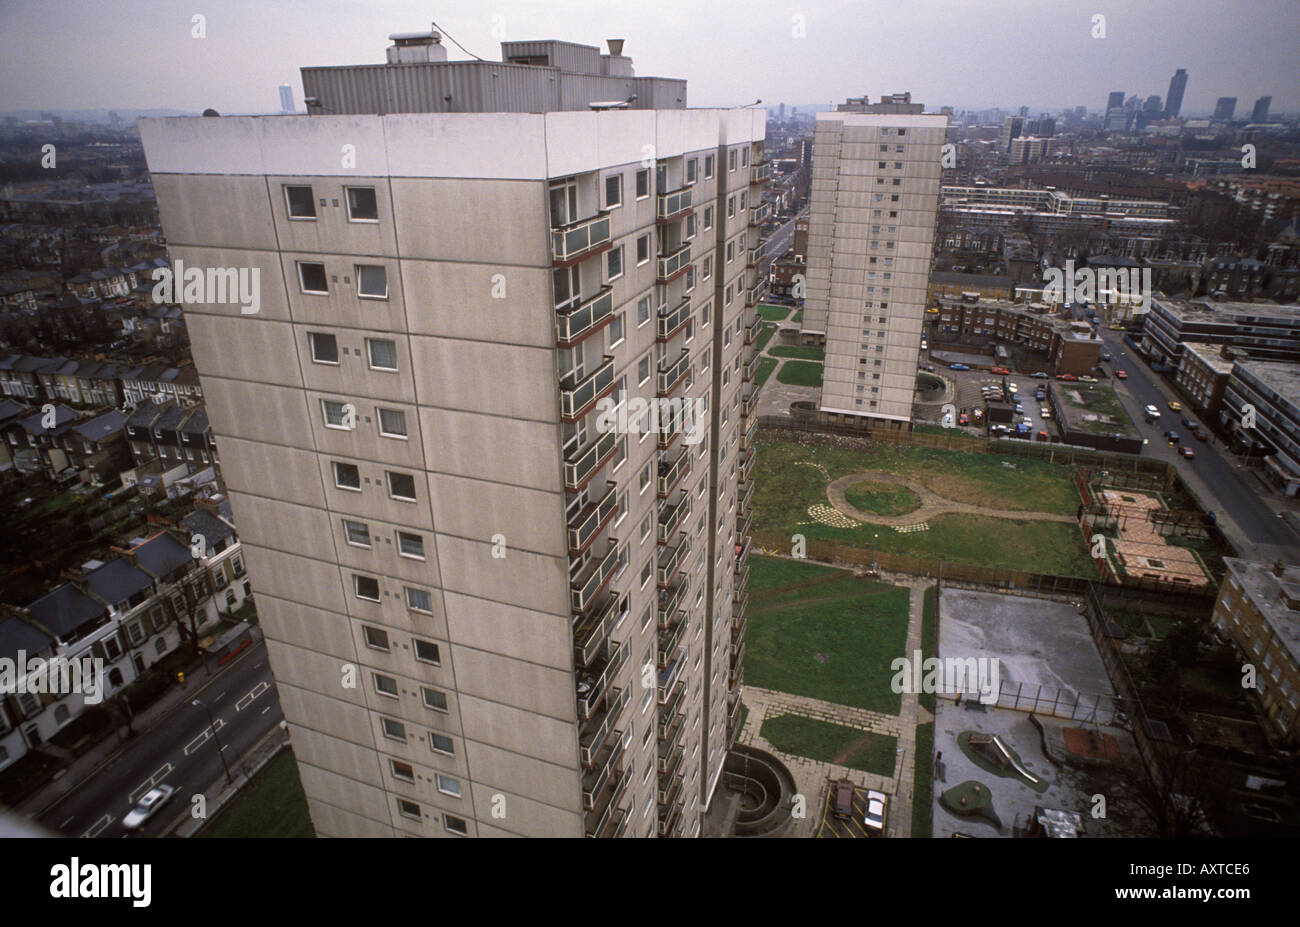 Housing high rise council flats view of London home subsidised housing poor  less well off Londoners 1990s UK HOMER SYKES Stock Photo - Alamy